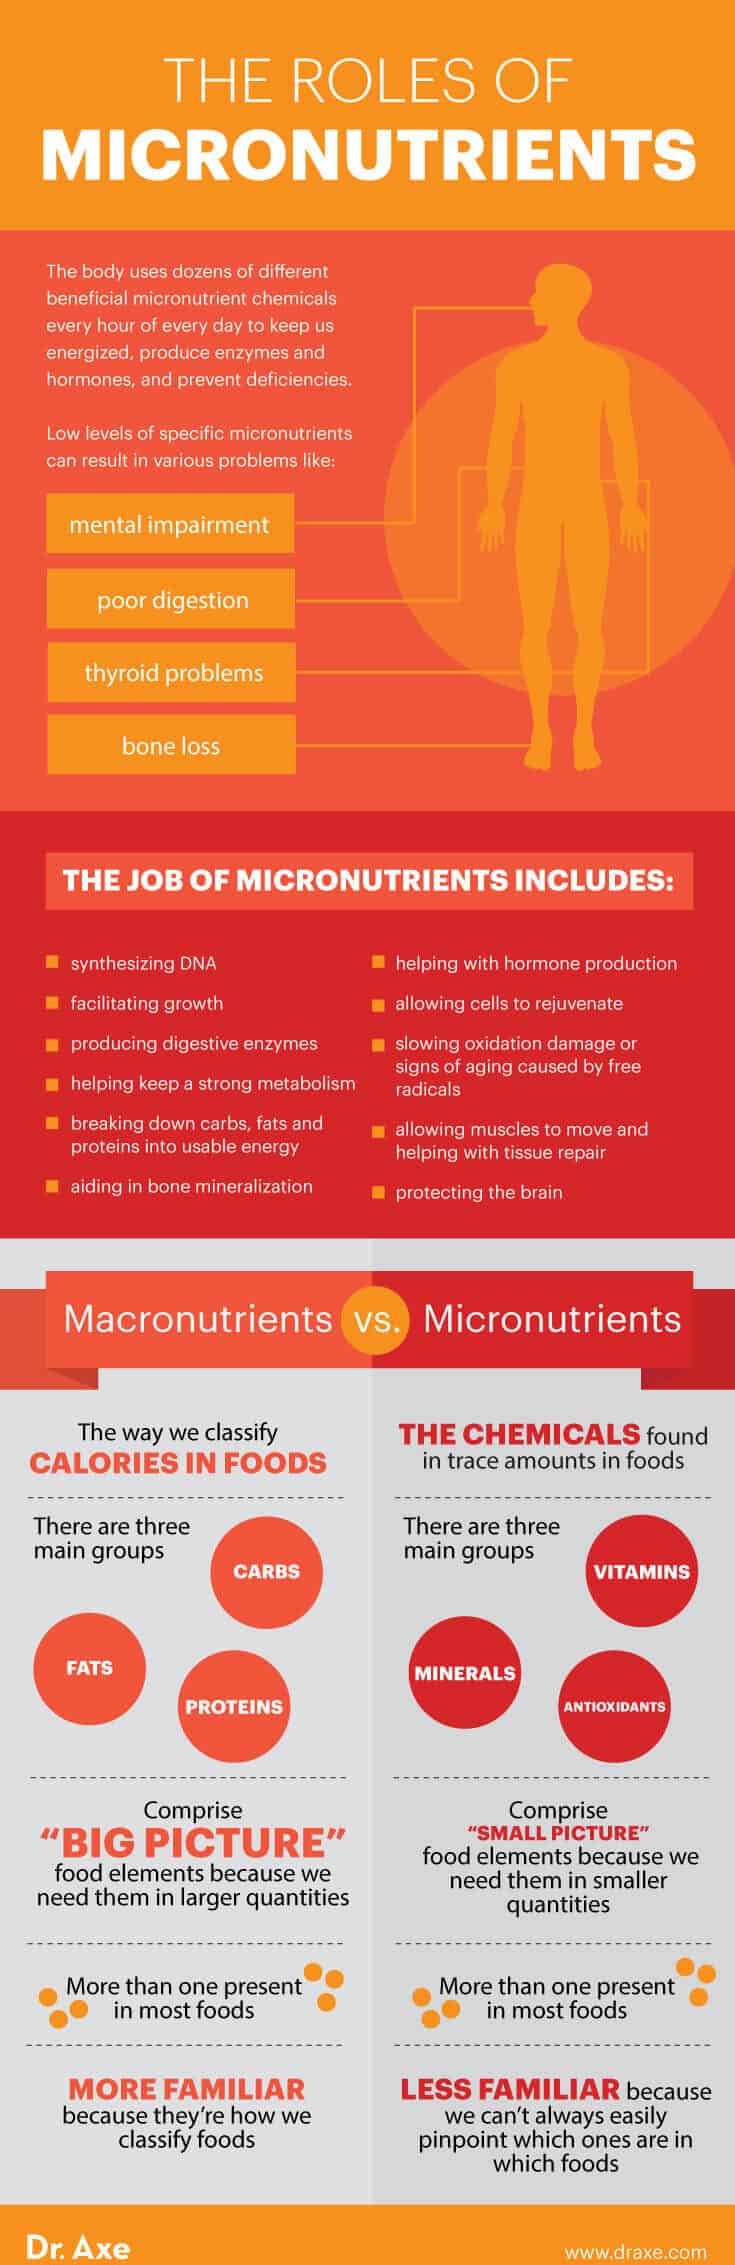 Role of micronutrients - Dr. Axe